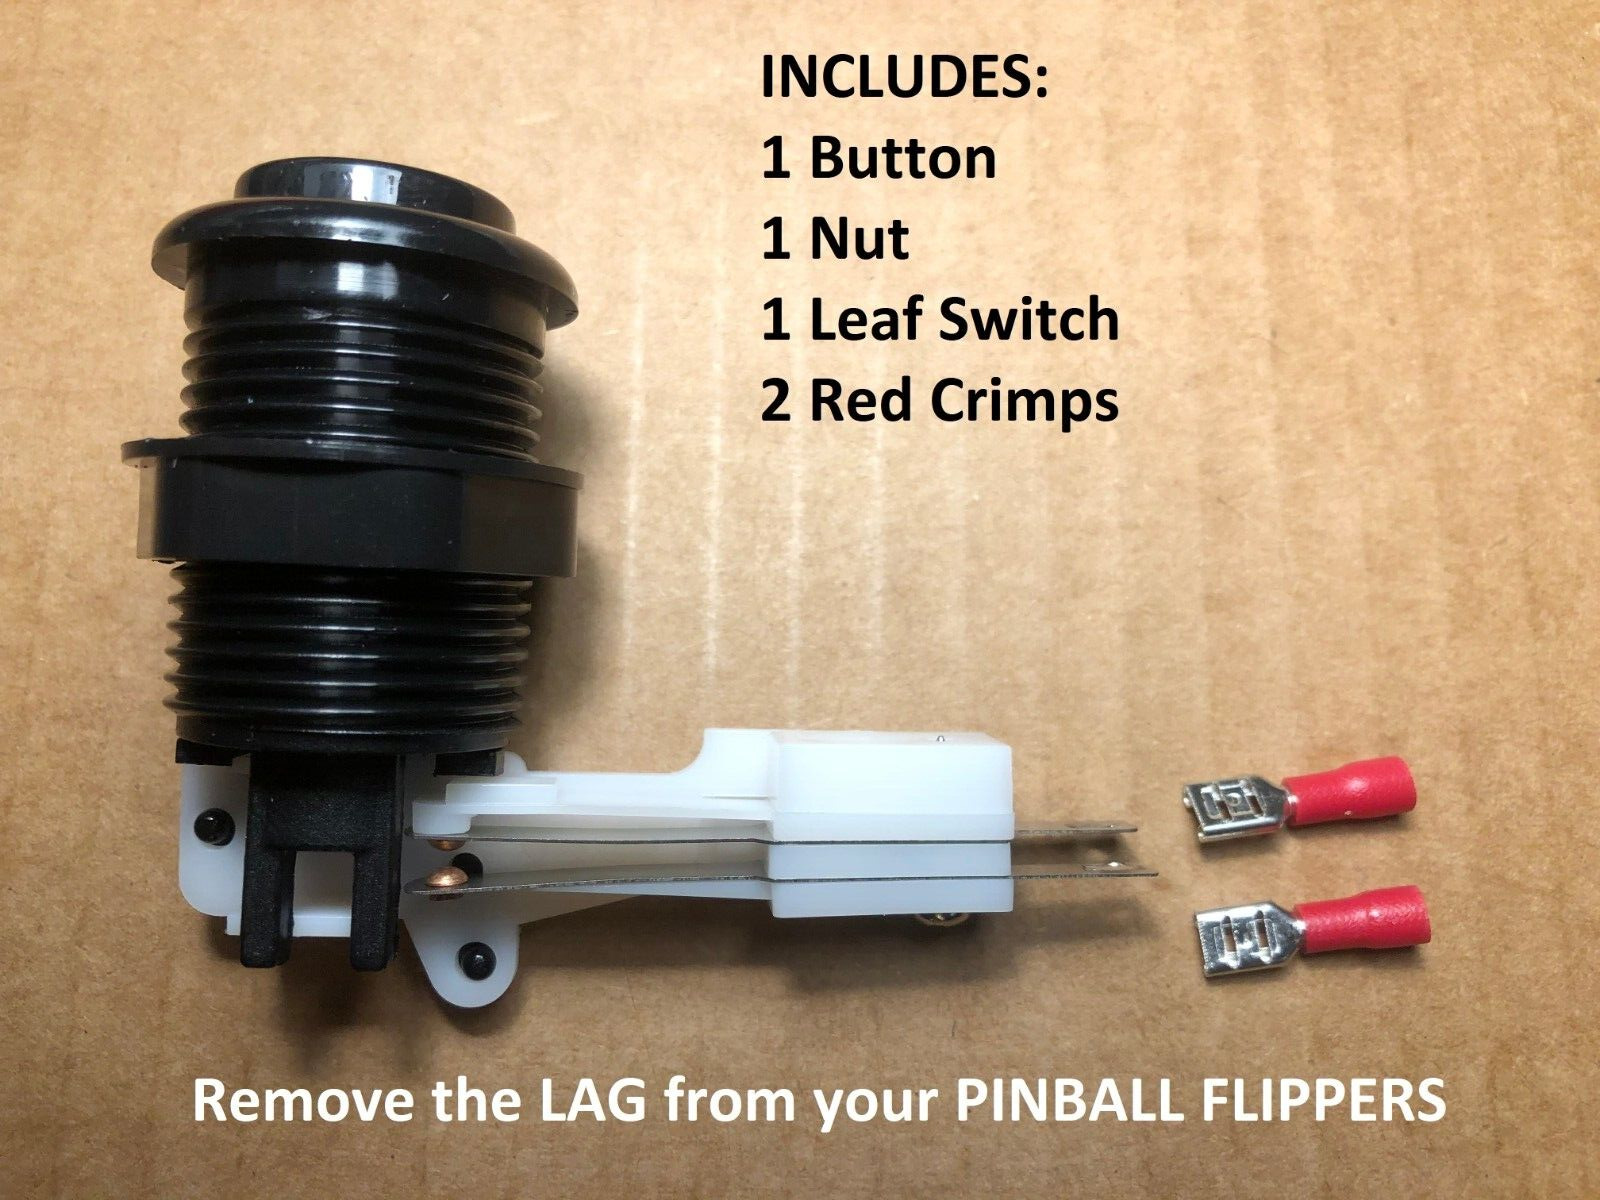 Atgames Legends Pinball LEAF SWITCH & BLACK PUSH BUTTON Replacement flippers lag